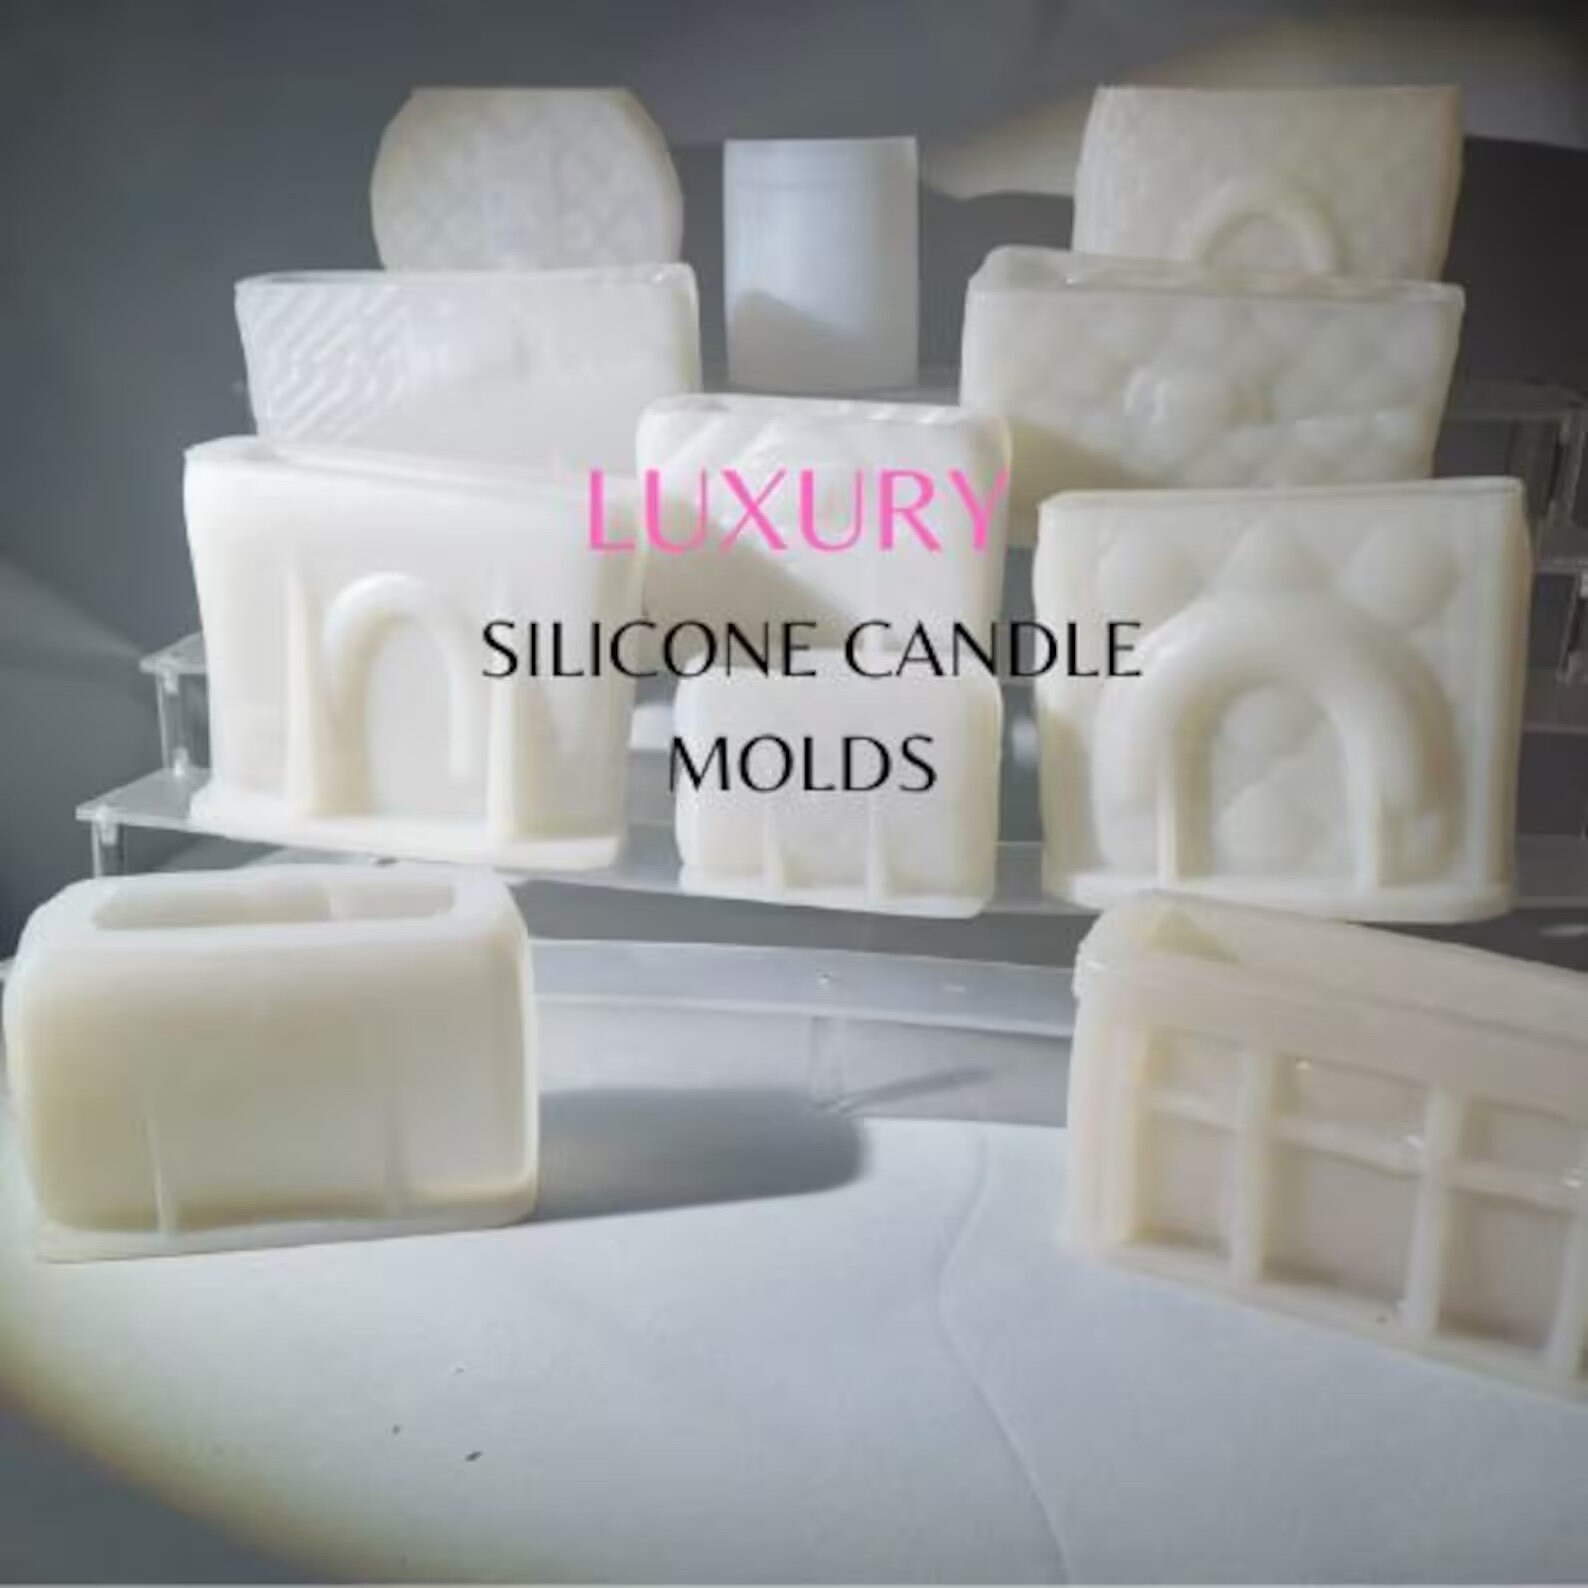 New mold Fashion Women's Handbag Candle Mold Luxury Girl Wallet Silicone  Mold Lady Purse Bag Scented Candles Wax Mold Handmade Crafts Tools